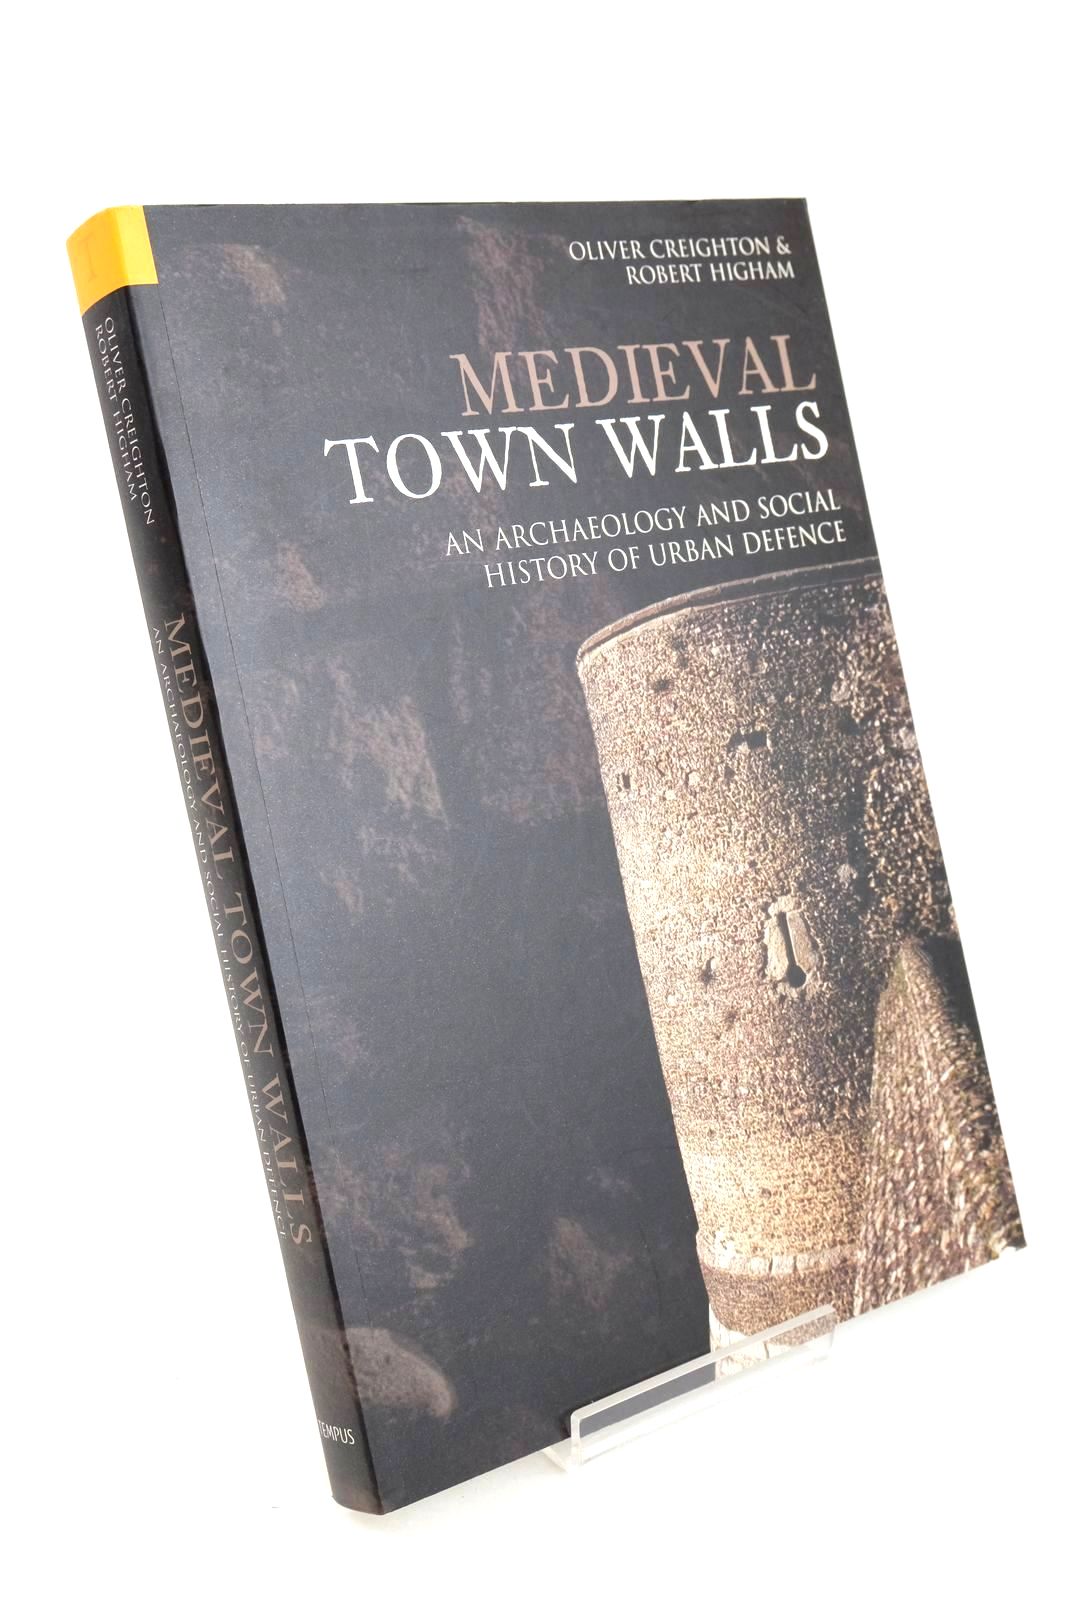 Photo of MEDIEVAL TOWN WALLS: AN ARCHAEOLOGY AND SOCIAL HISTORY OF URBAN DEFENCE- Stock Number: 1327716